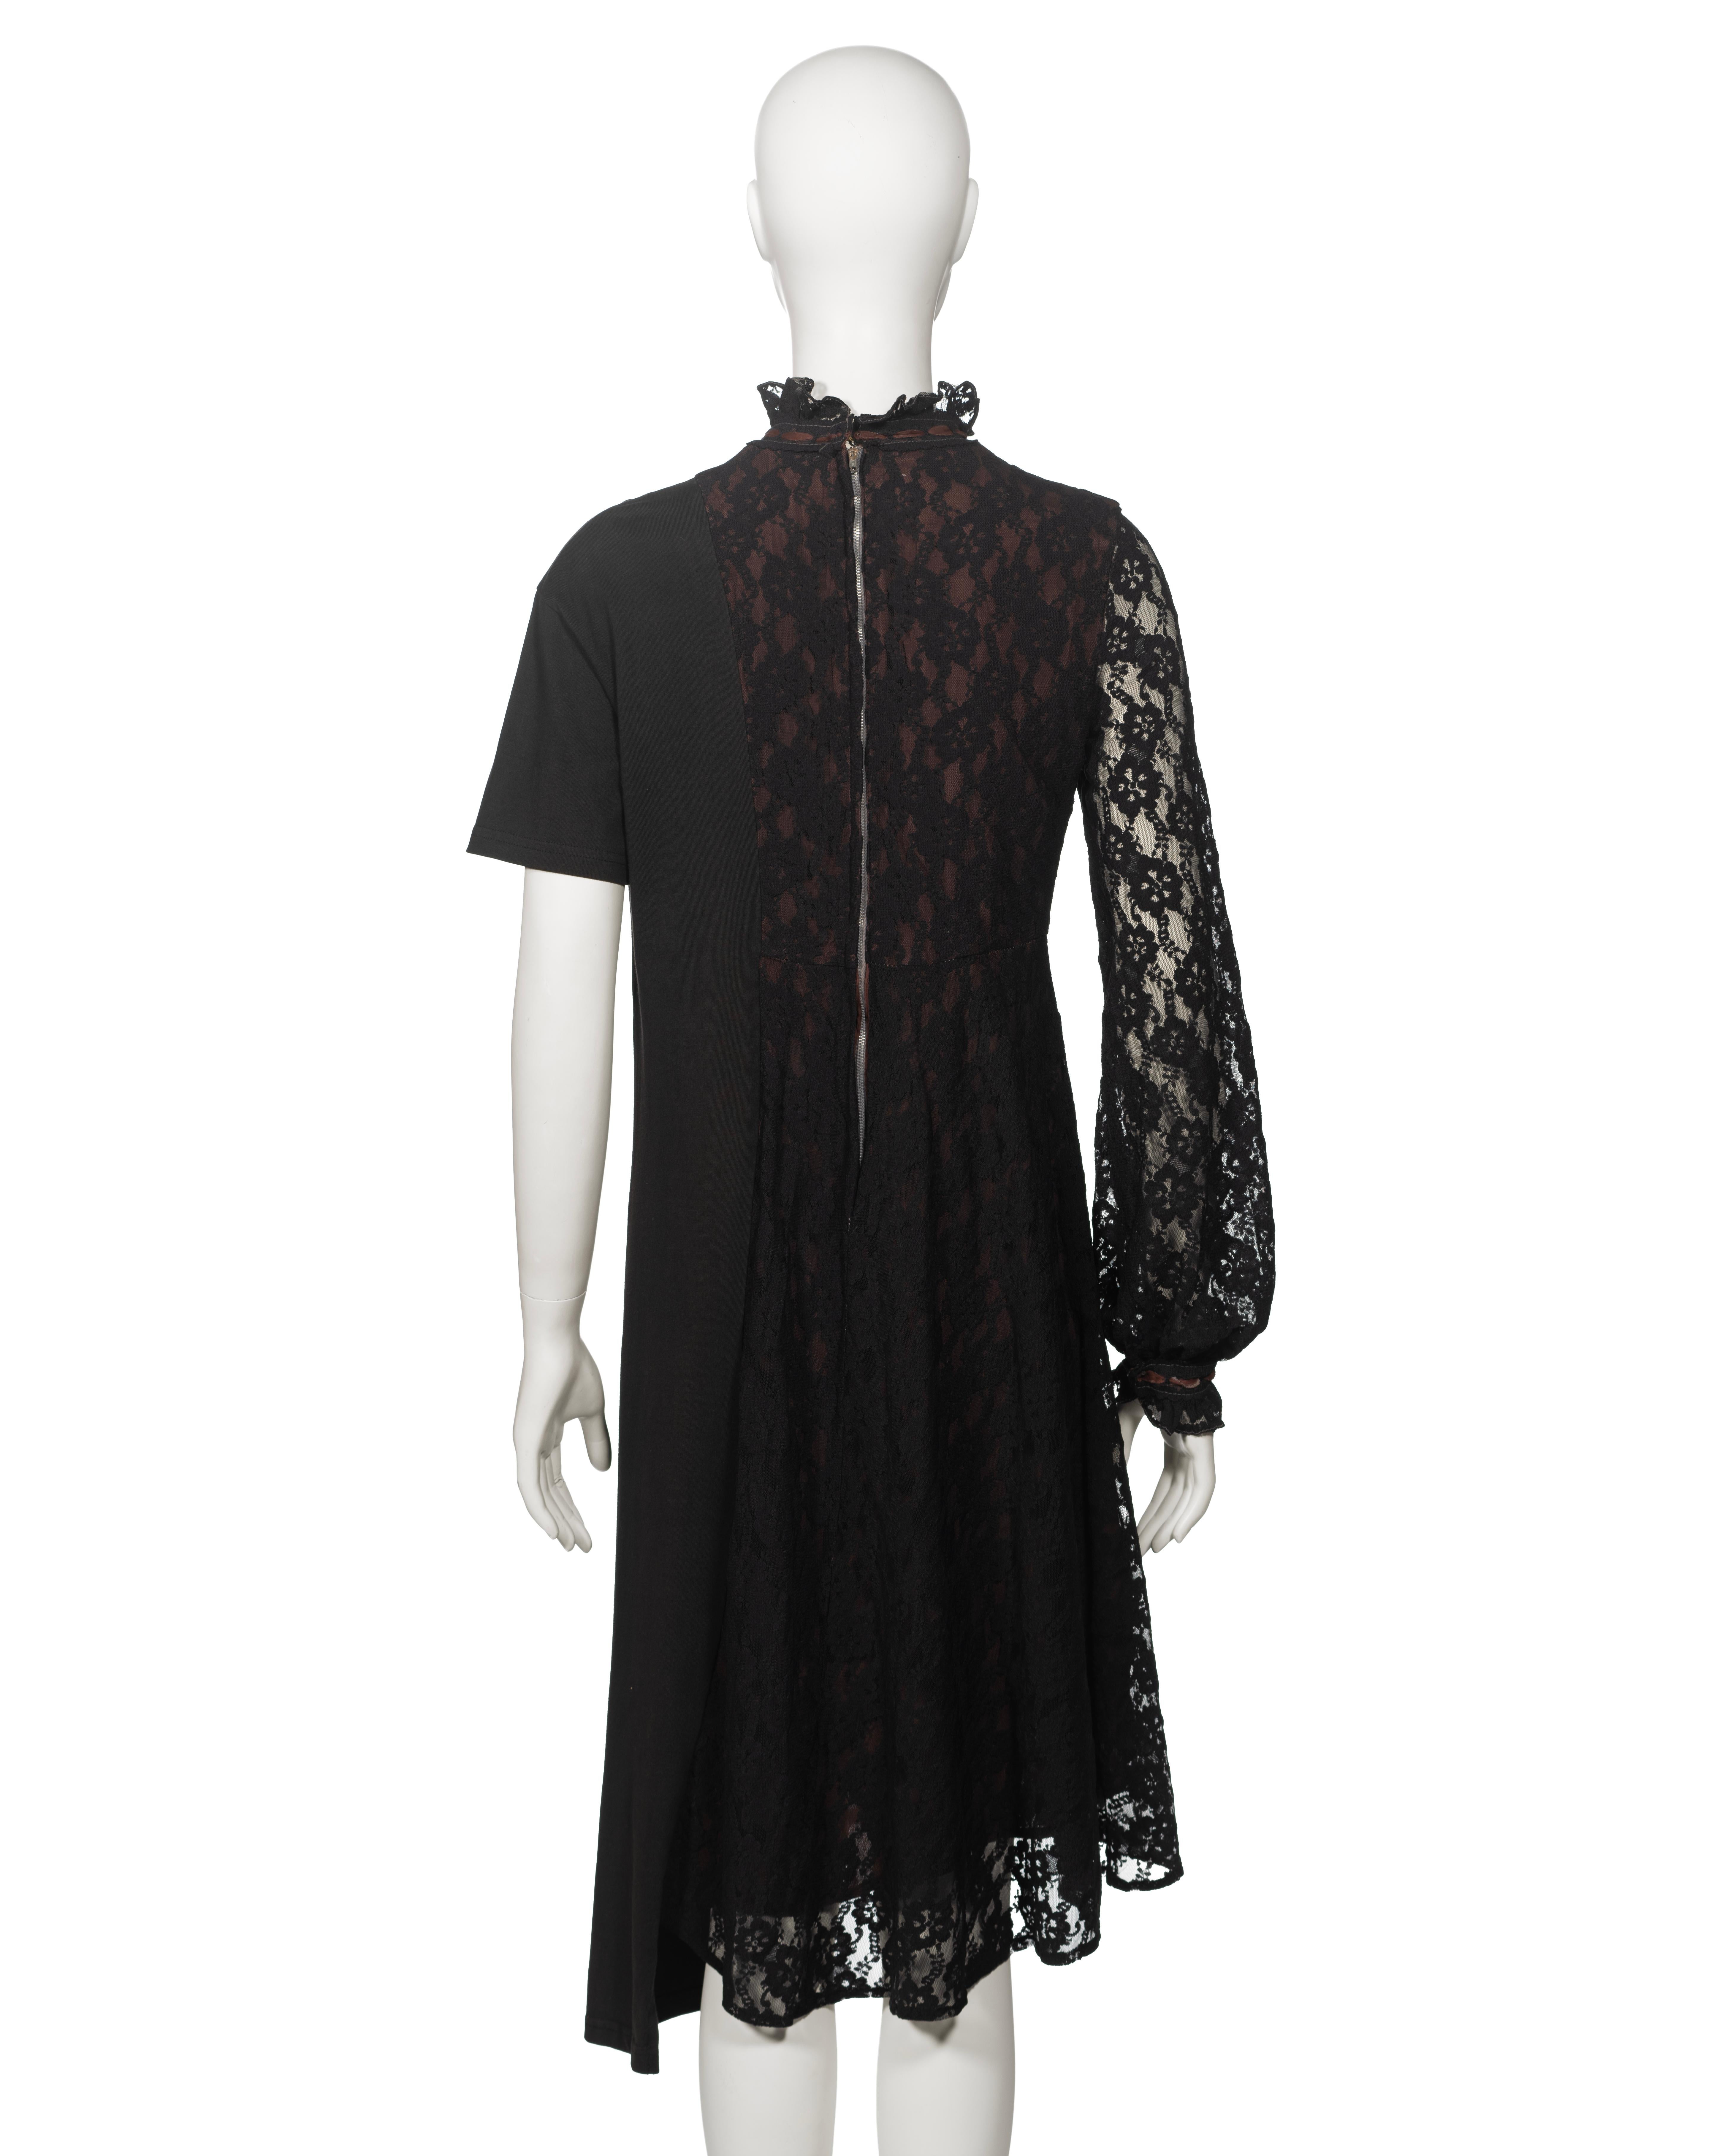 Martin Margiela Artisanal Dress Made From Two Vintage Dresses, fw 2003 For Sale 5